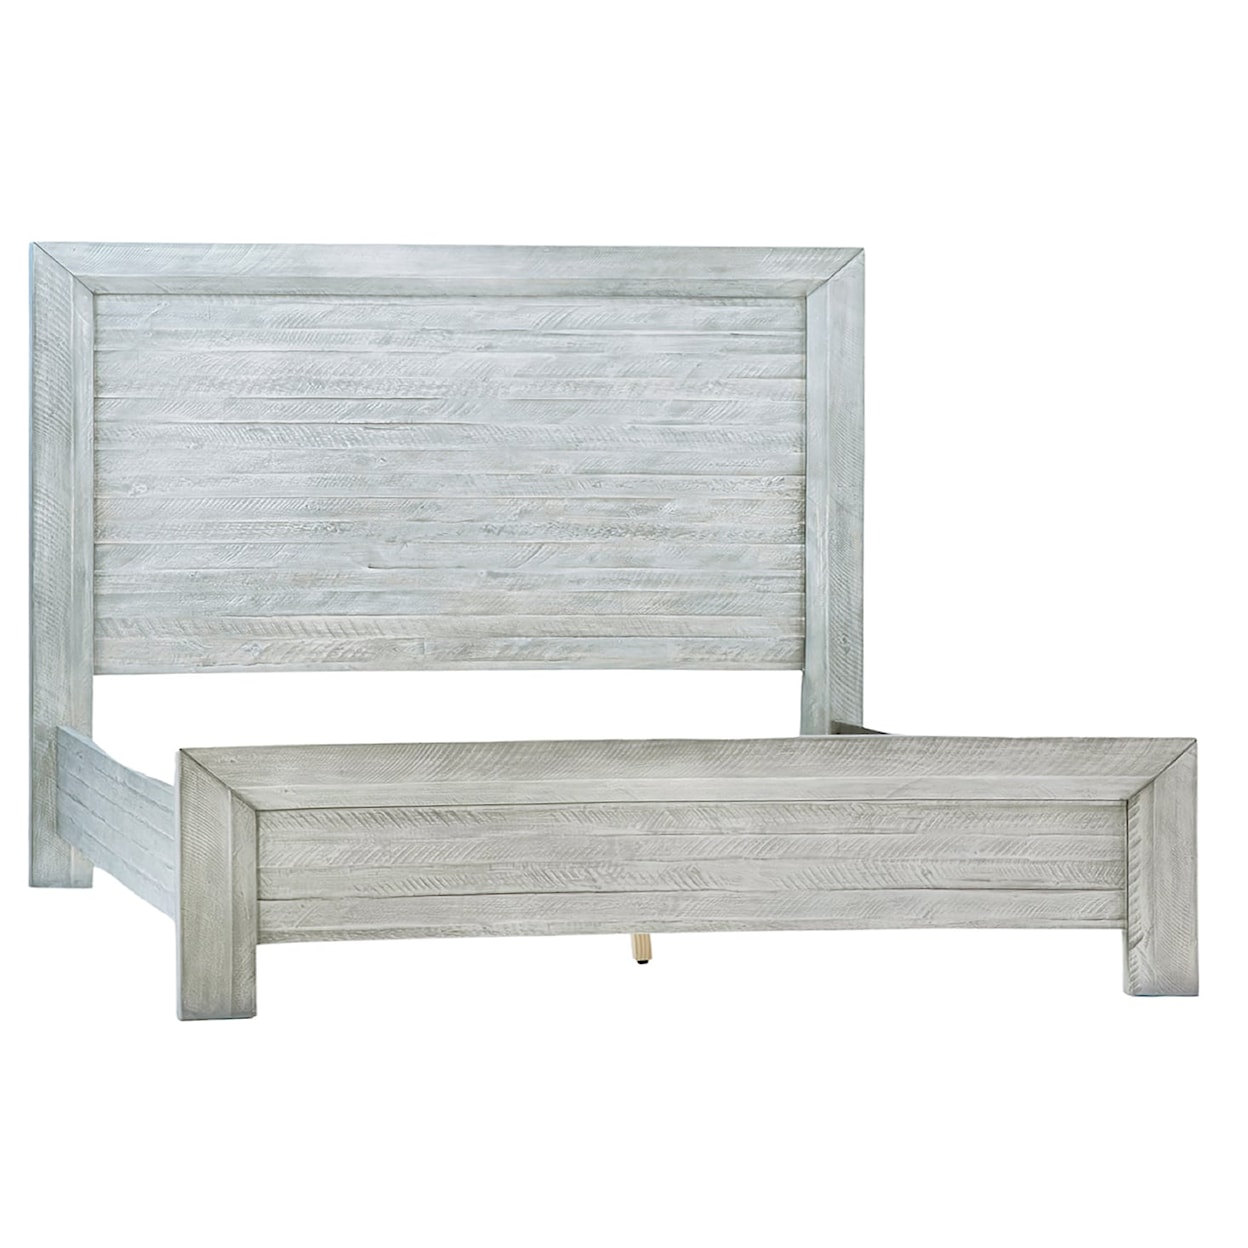 Dovetail Furniture Clancy Clancy East King Bed